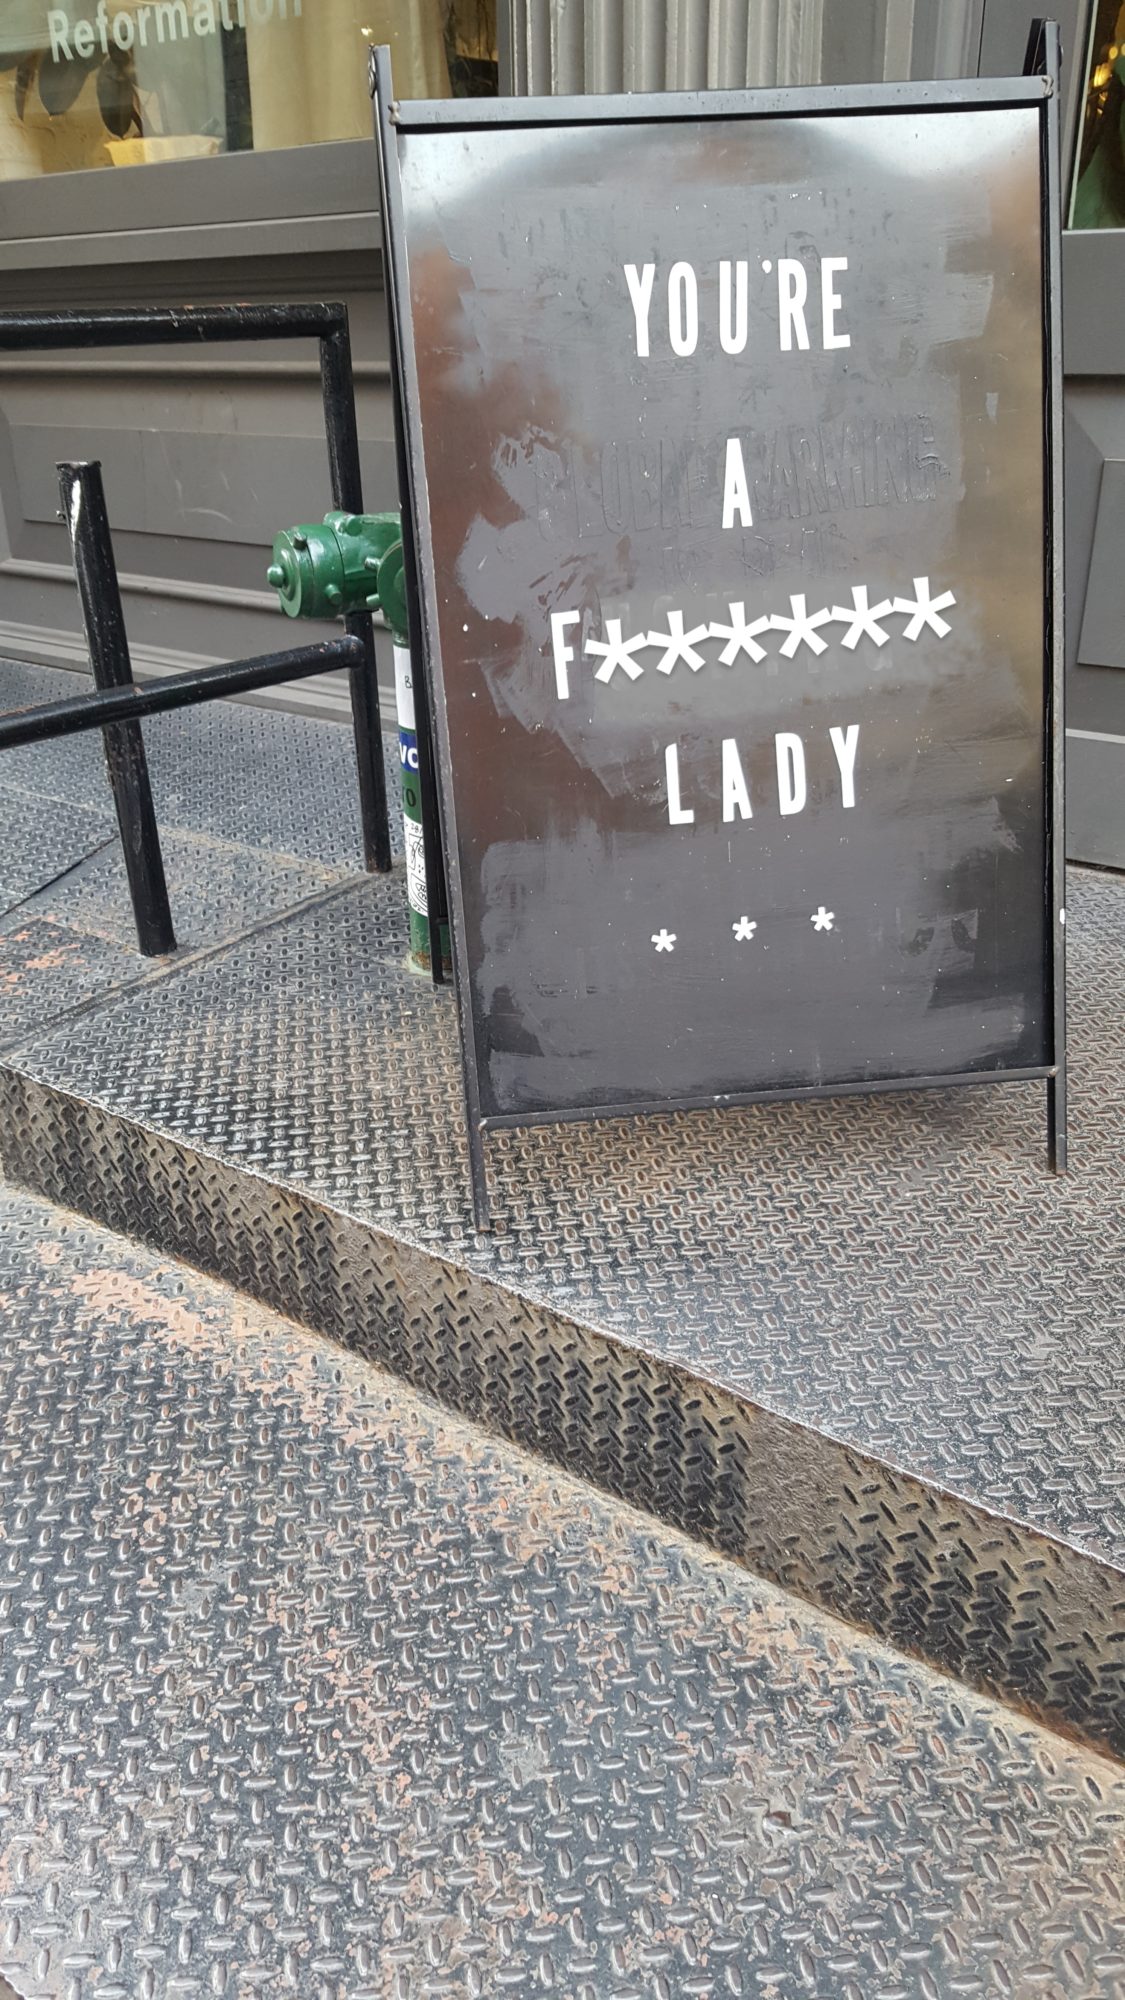 A sign that reads "You're a F****** Lady"